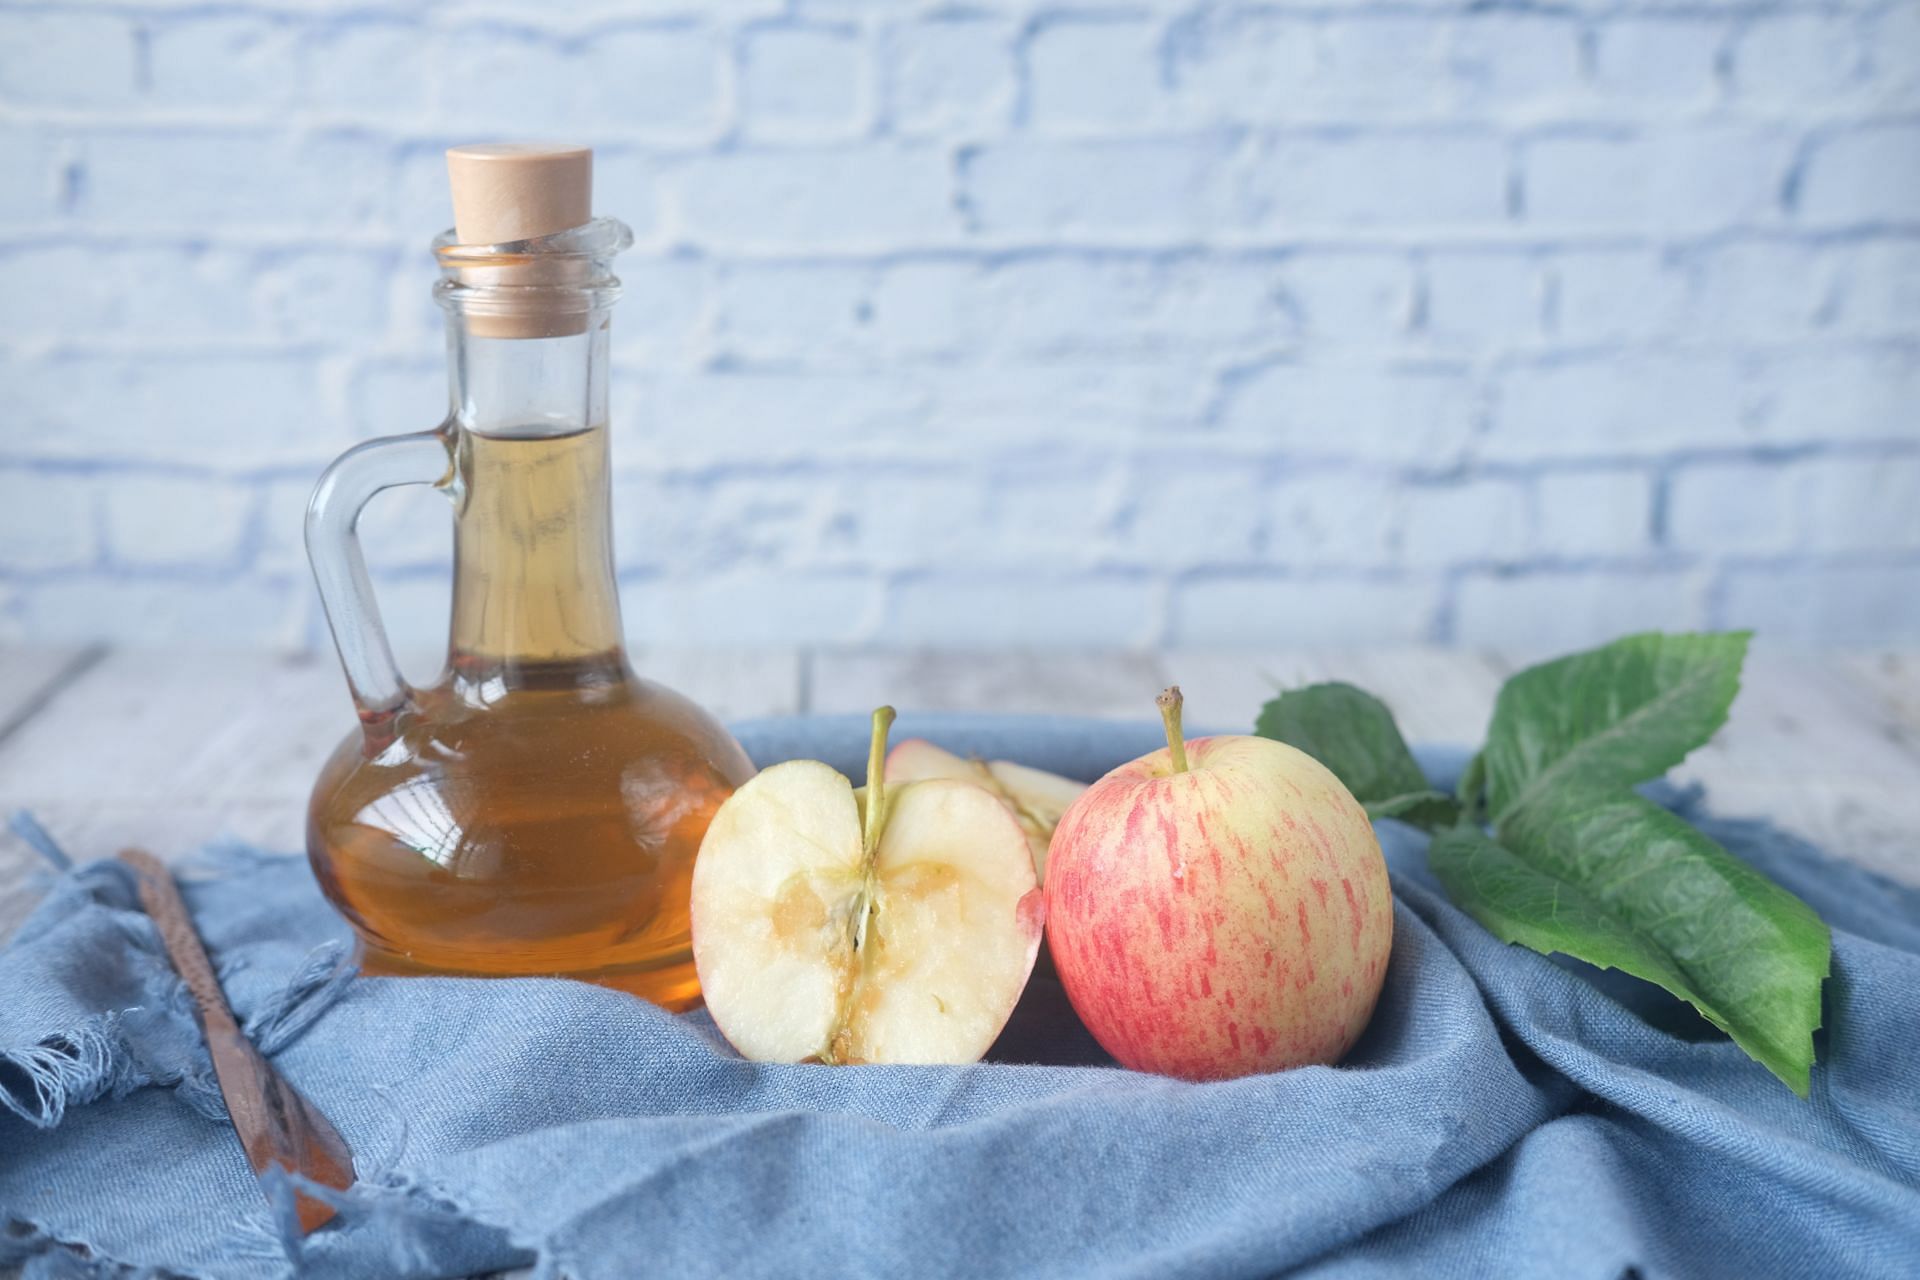 Apple cider vinegar can also be used to prevent yeast infection. (Image via Unsplash/Towfiqu Barbhuiya)